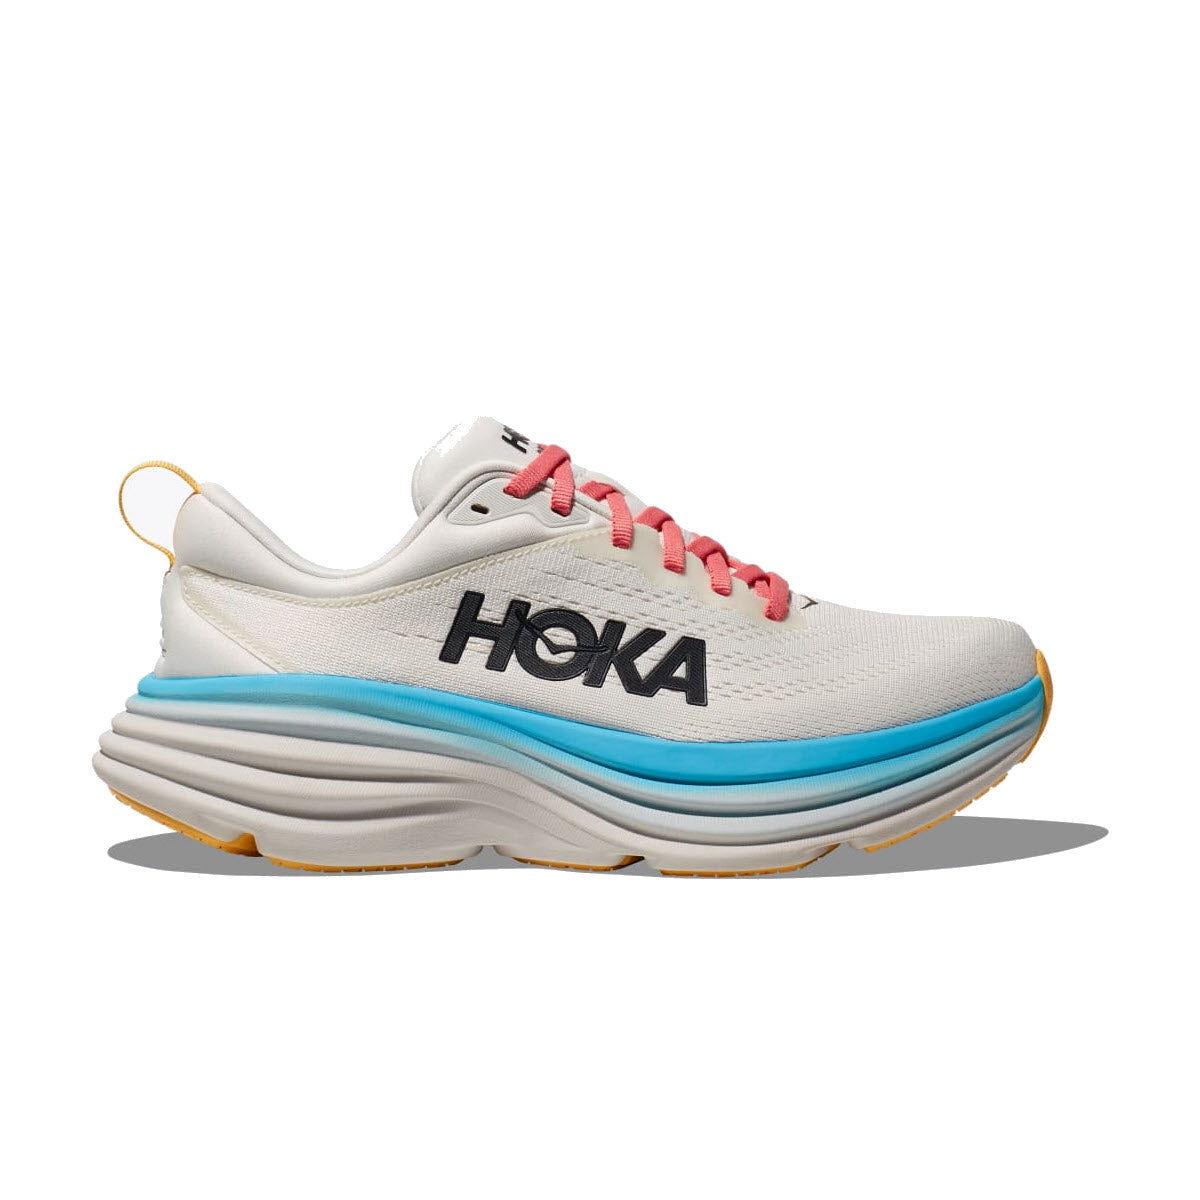 Hoka BONDI 8 Blanc De Blanc/Swim Day - Women running shoe with blue and yellow accents, and thick, cushioned sole.